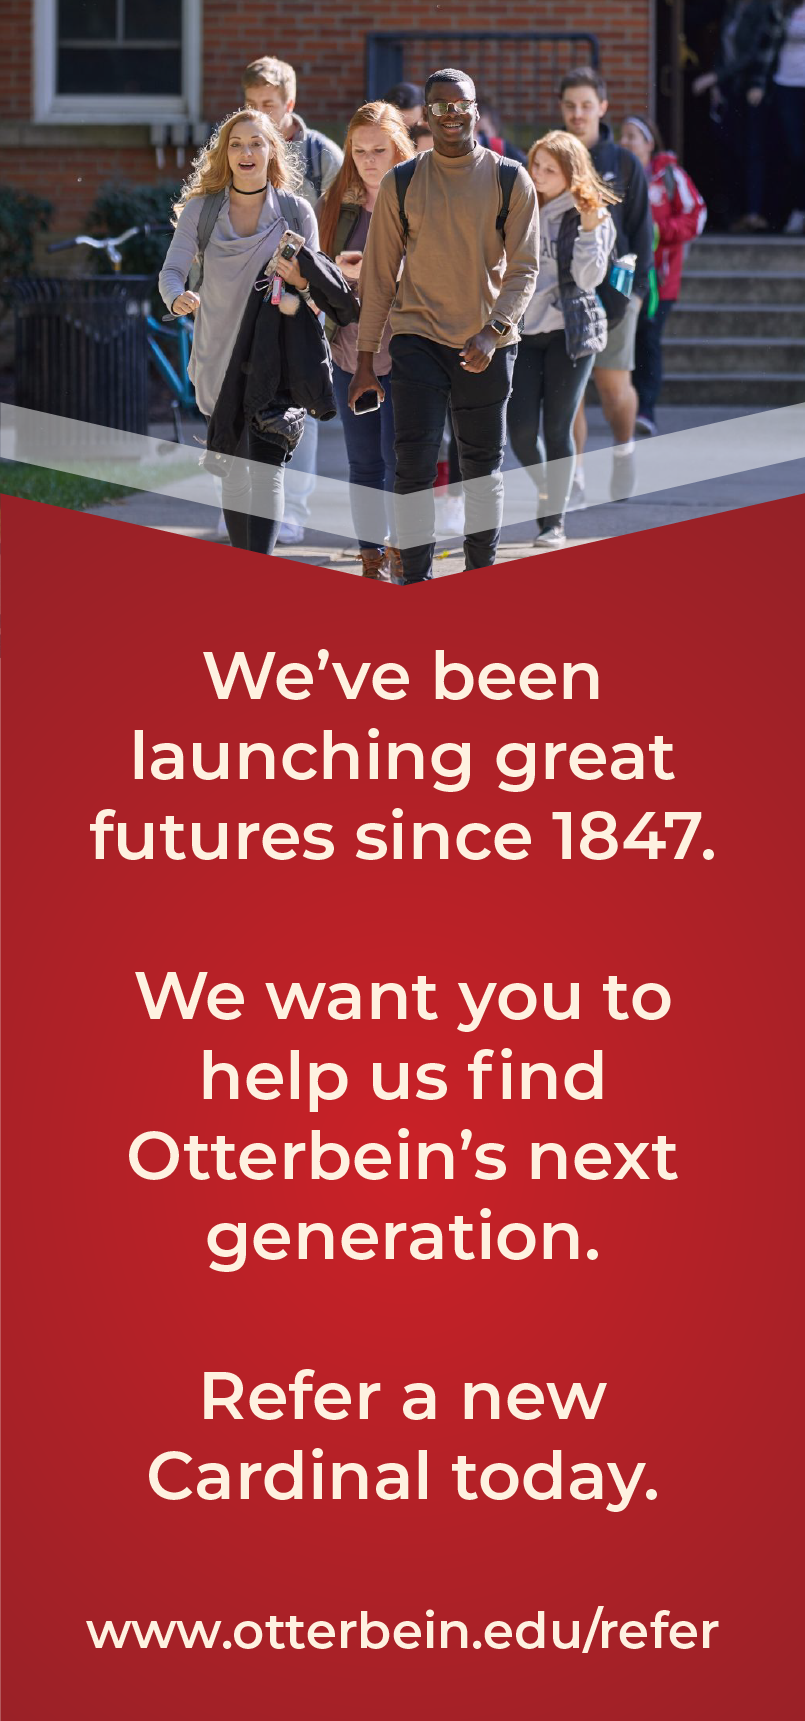 We've been launching great futures since 1847. Learn more at otterbein.edu/refer